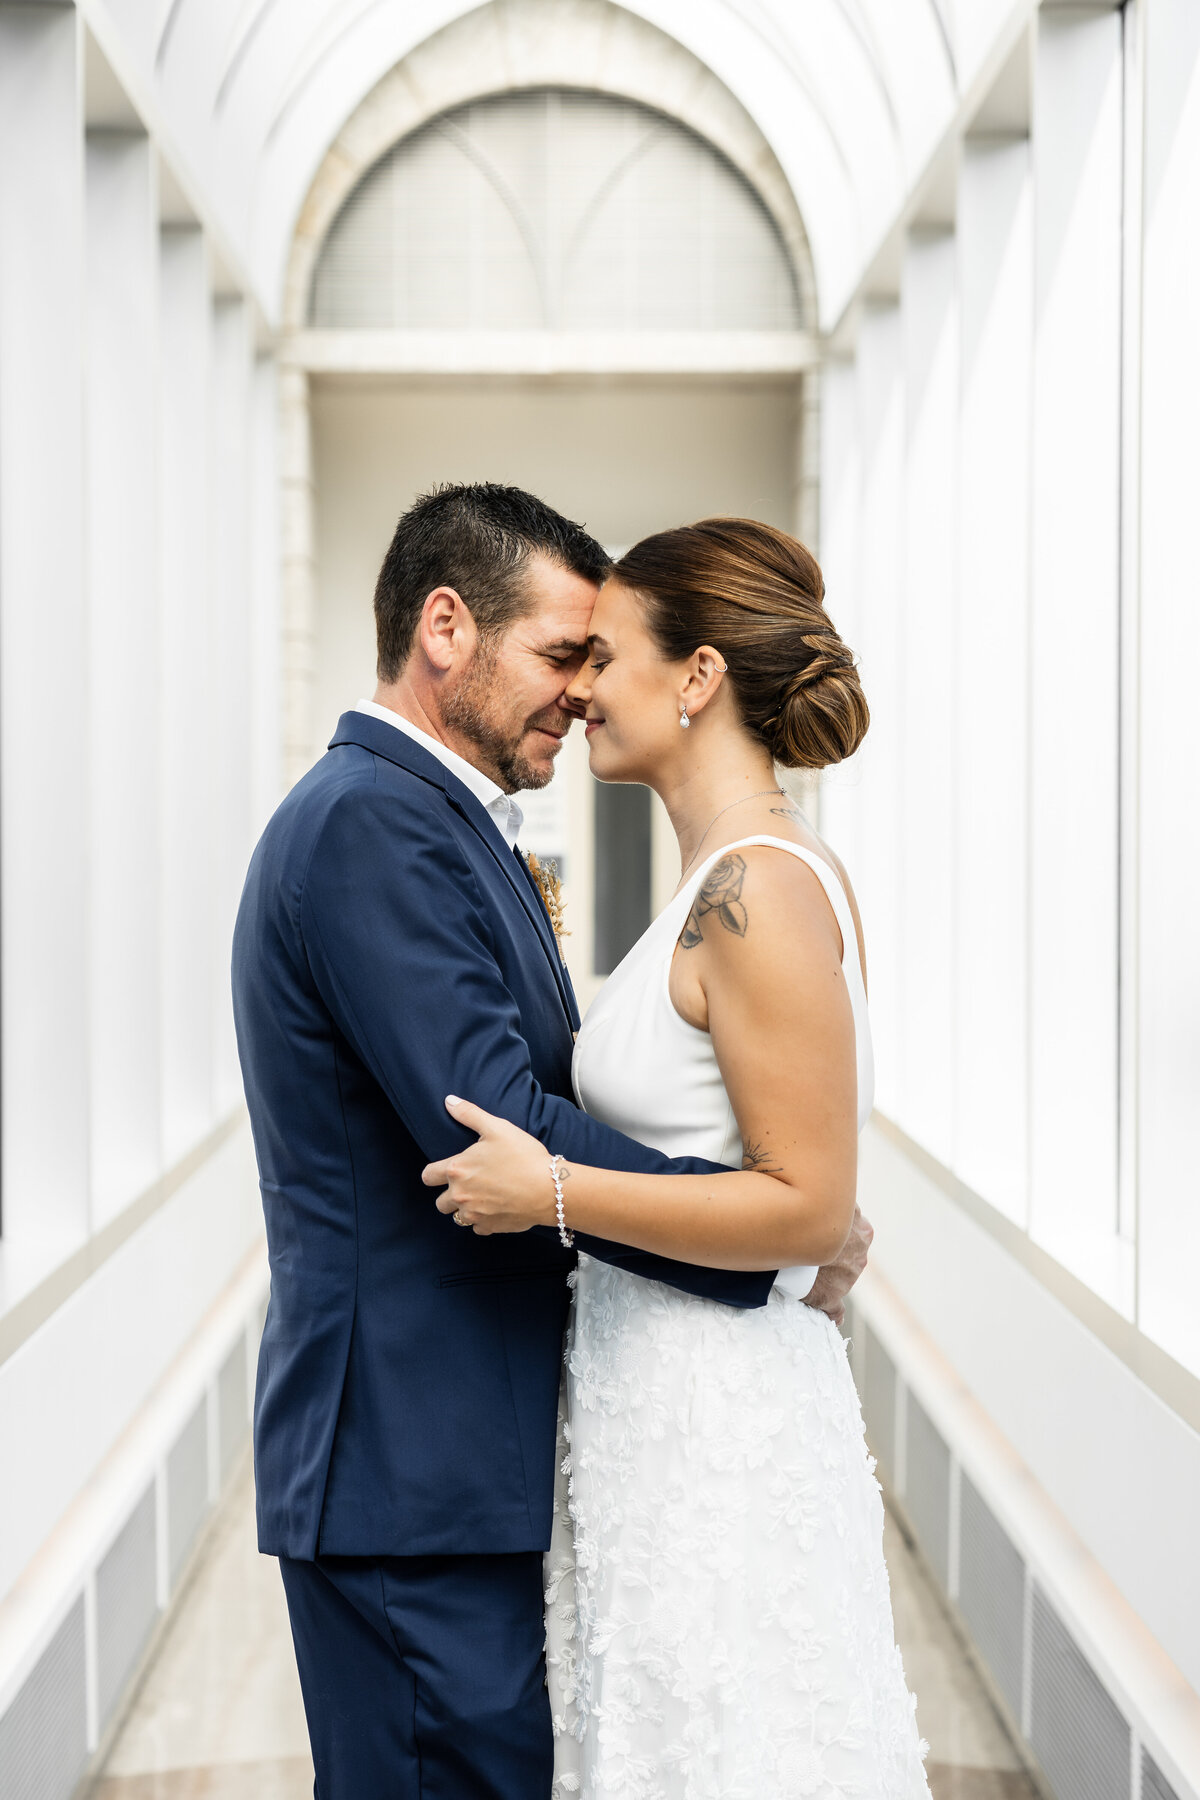 Ottawa city hall elopement, bride and groom embracing each other